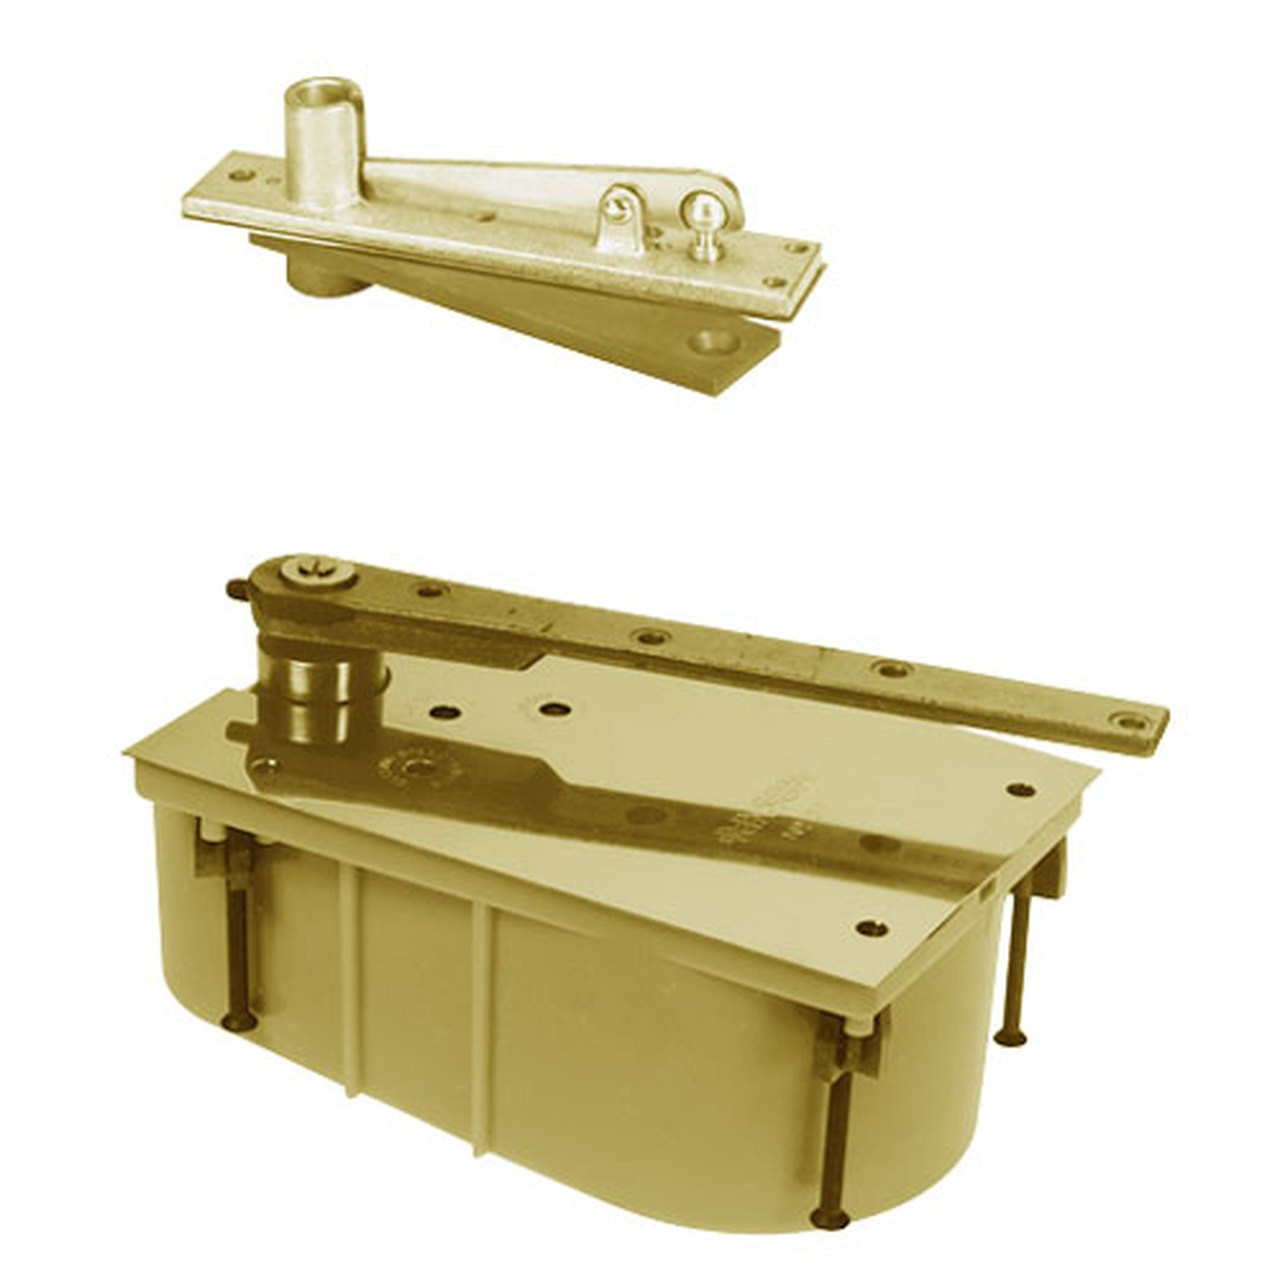 28-105S-554-LFP-LCC-LH-606 Rixson 28 Series Heavy Duty Single Acting Center Hung Floor Closer with Concealed Arm in Satin Brass Finish